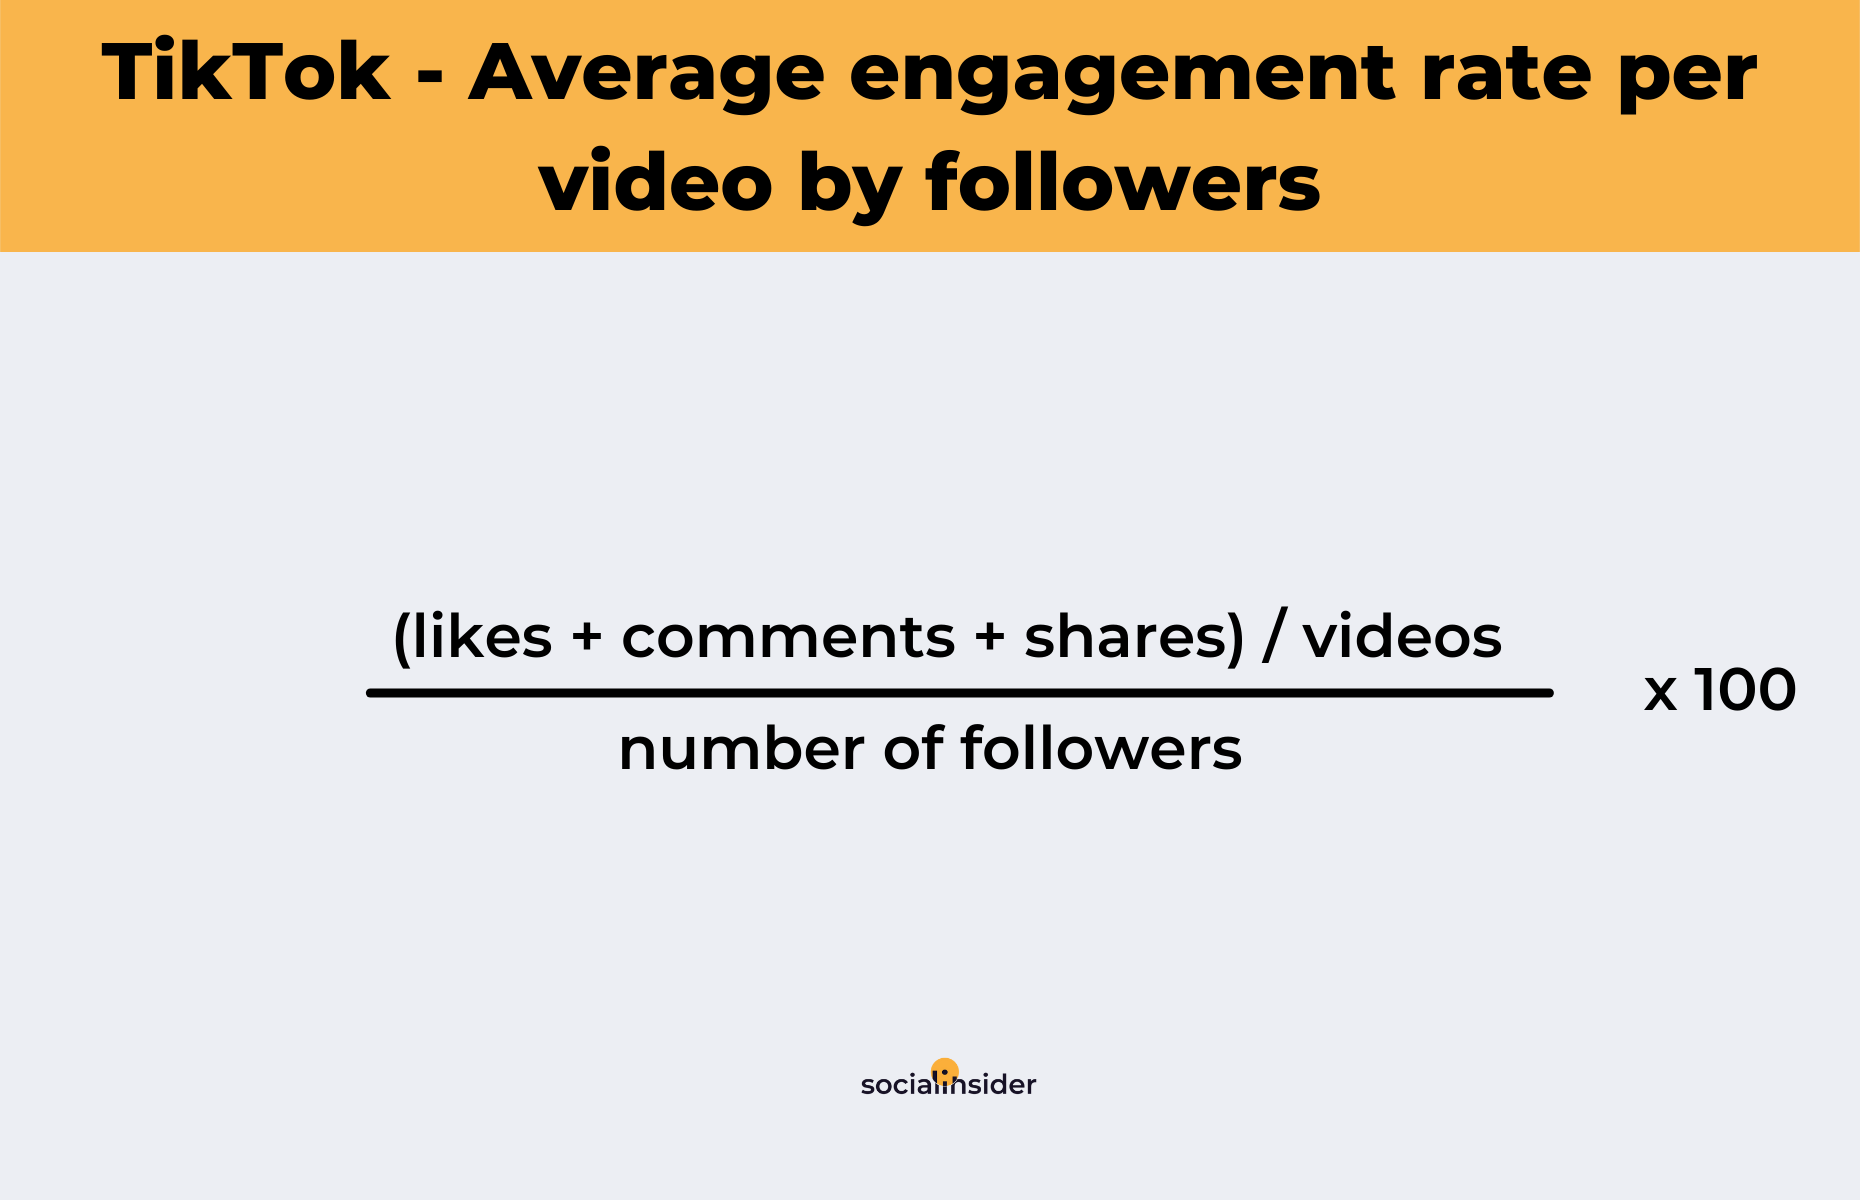 How to calculate the average engagement rate on TikTok